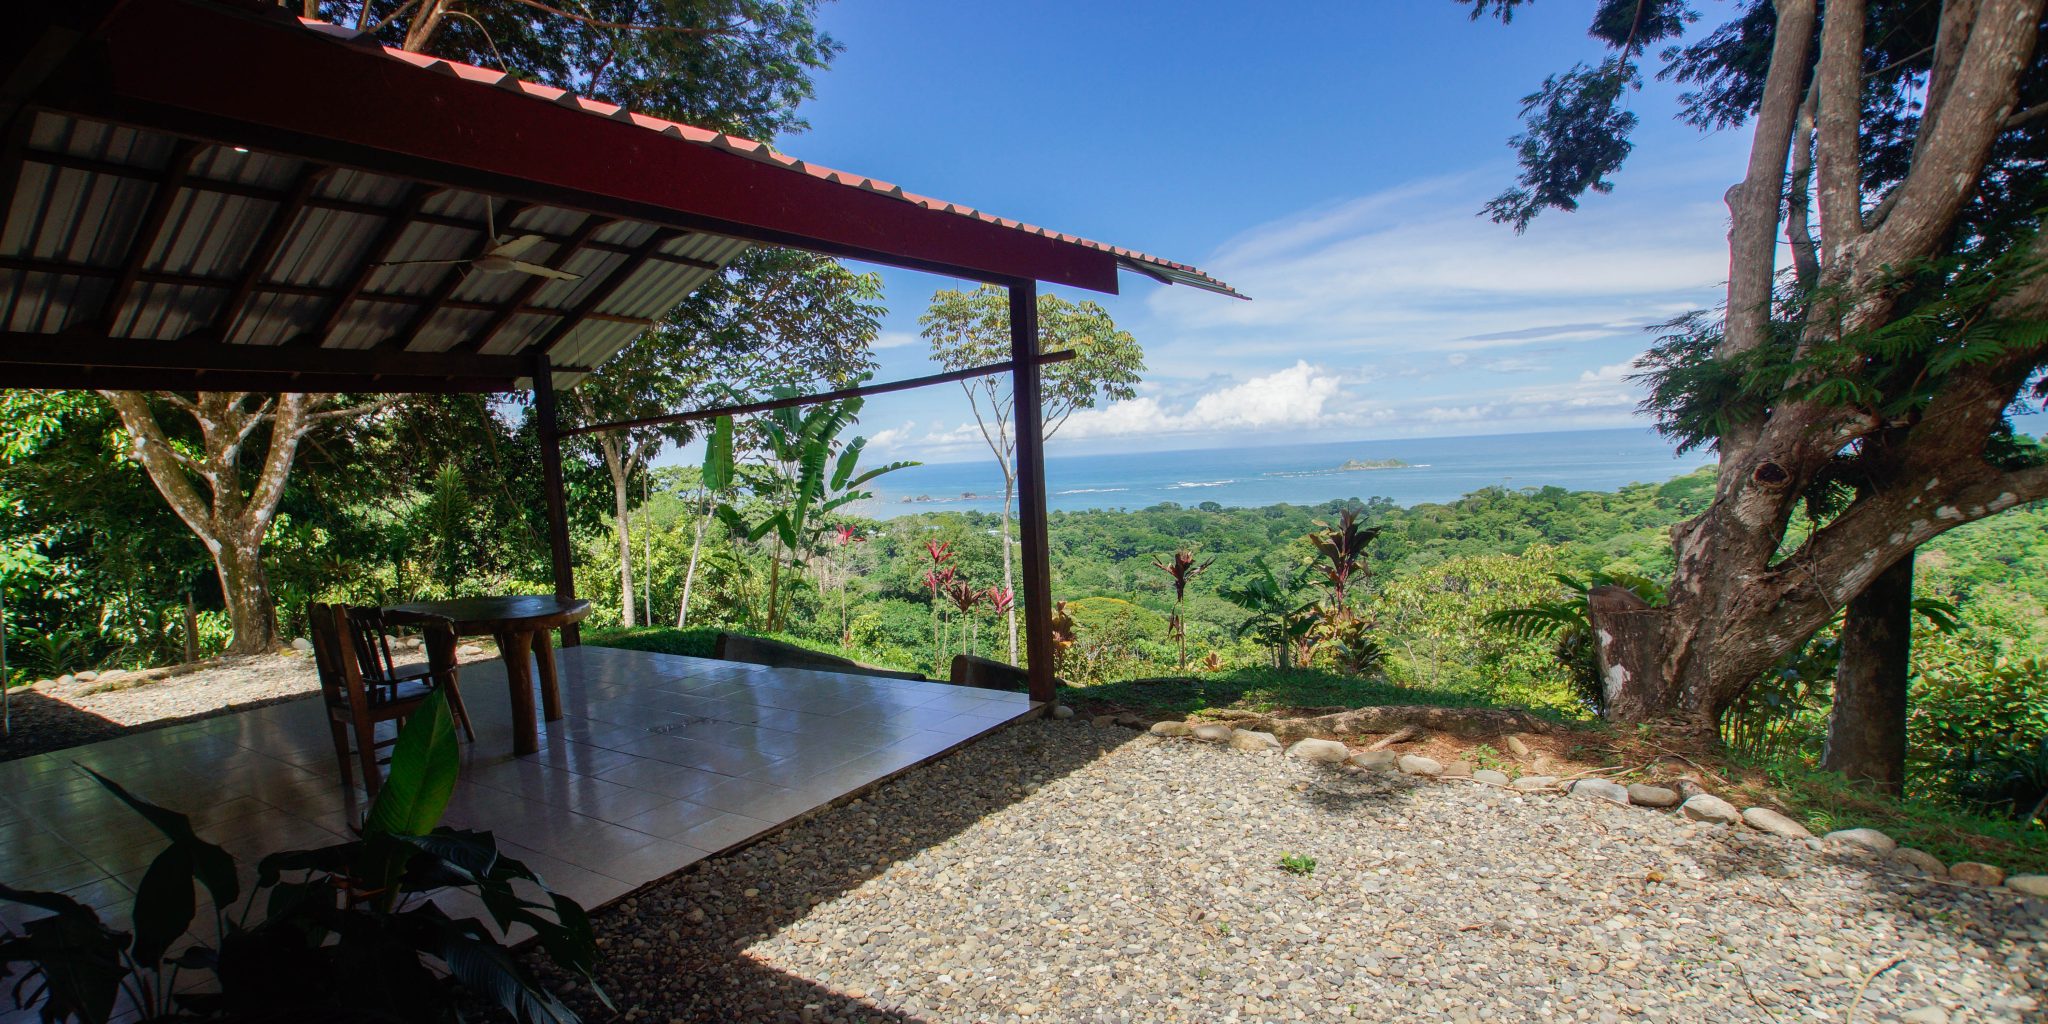 1 ACRE - 2 Bedroom Home With Pool And Incredible Ocean View At Very Affordable Price!!!